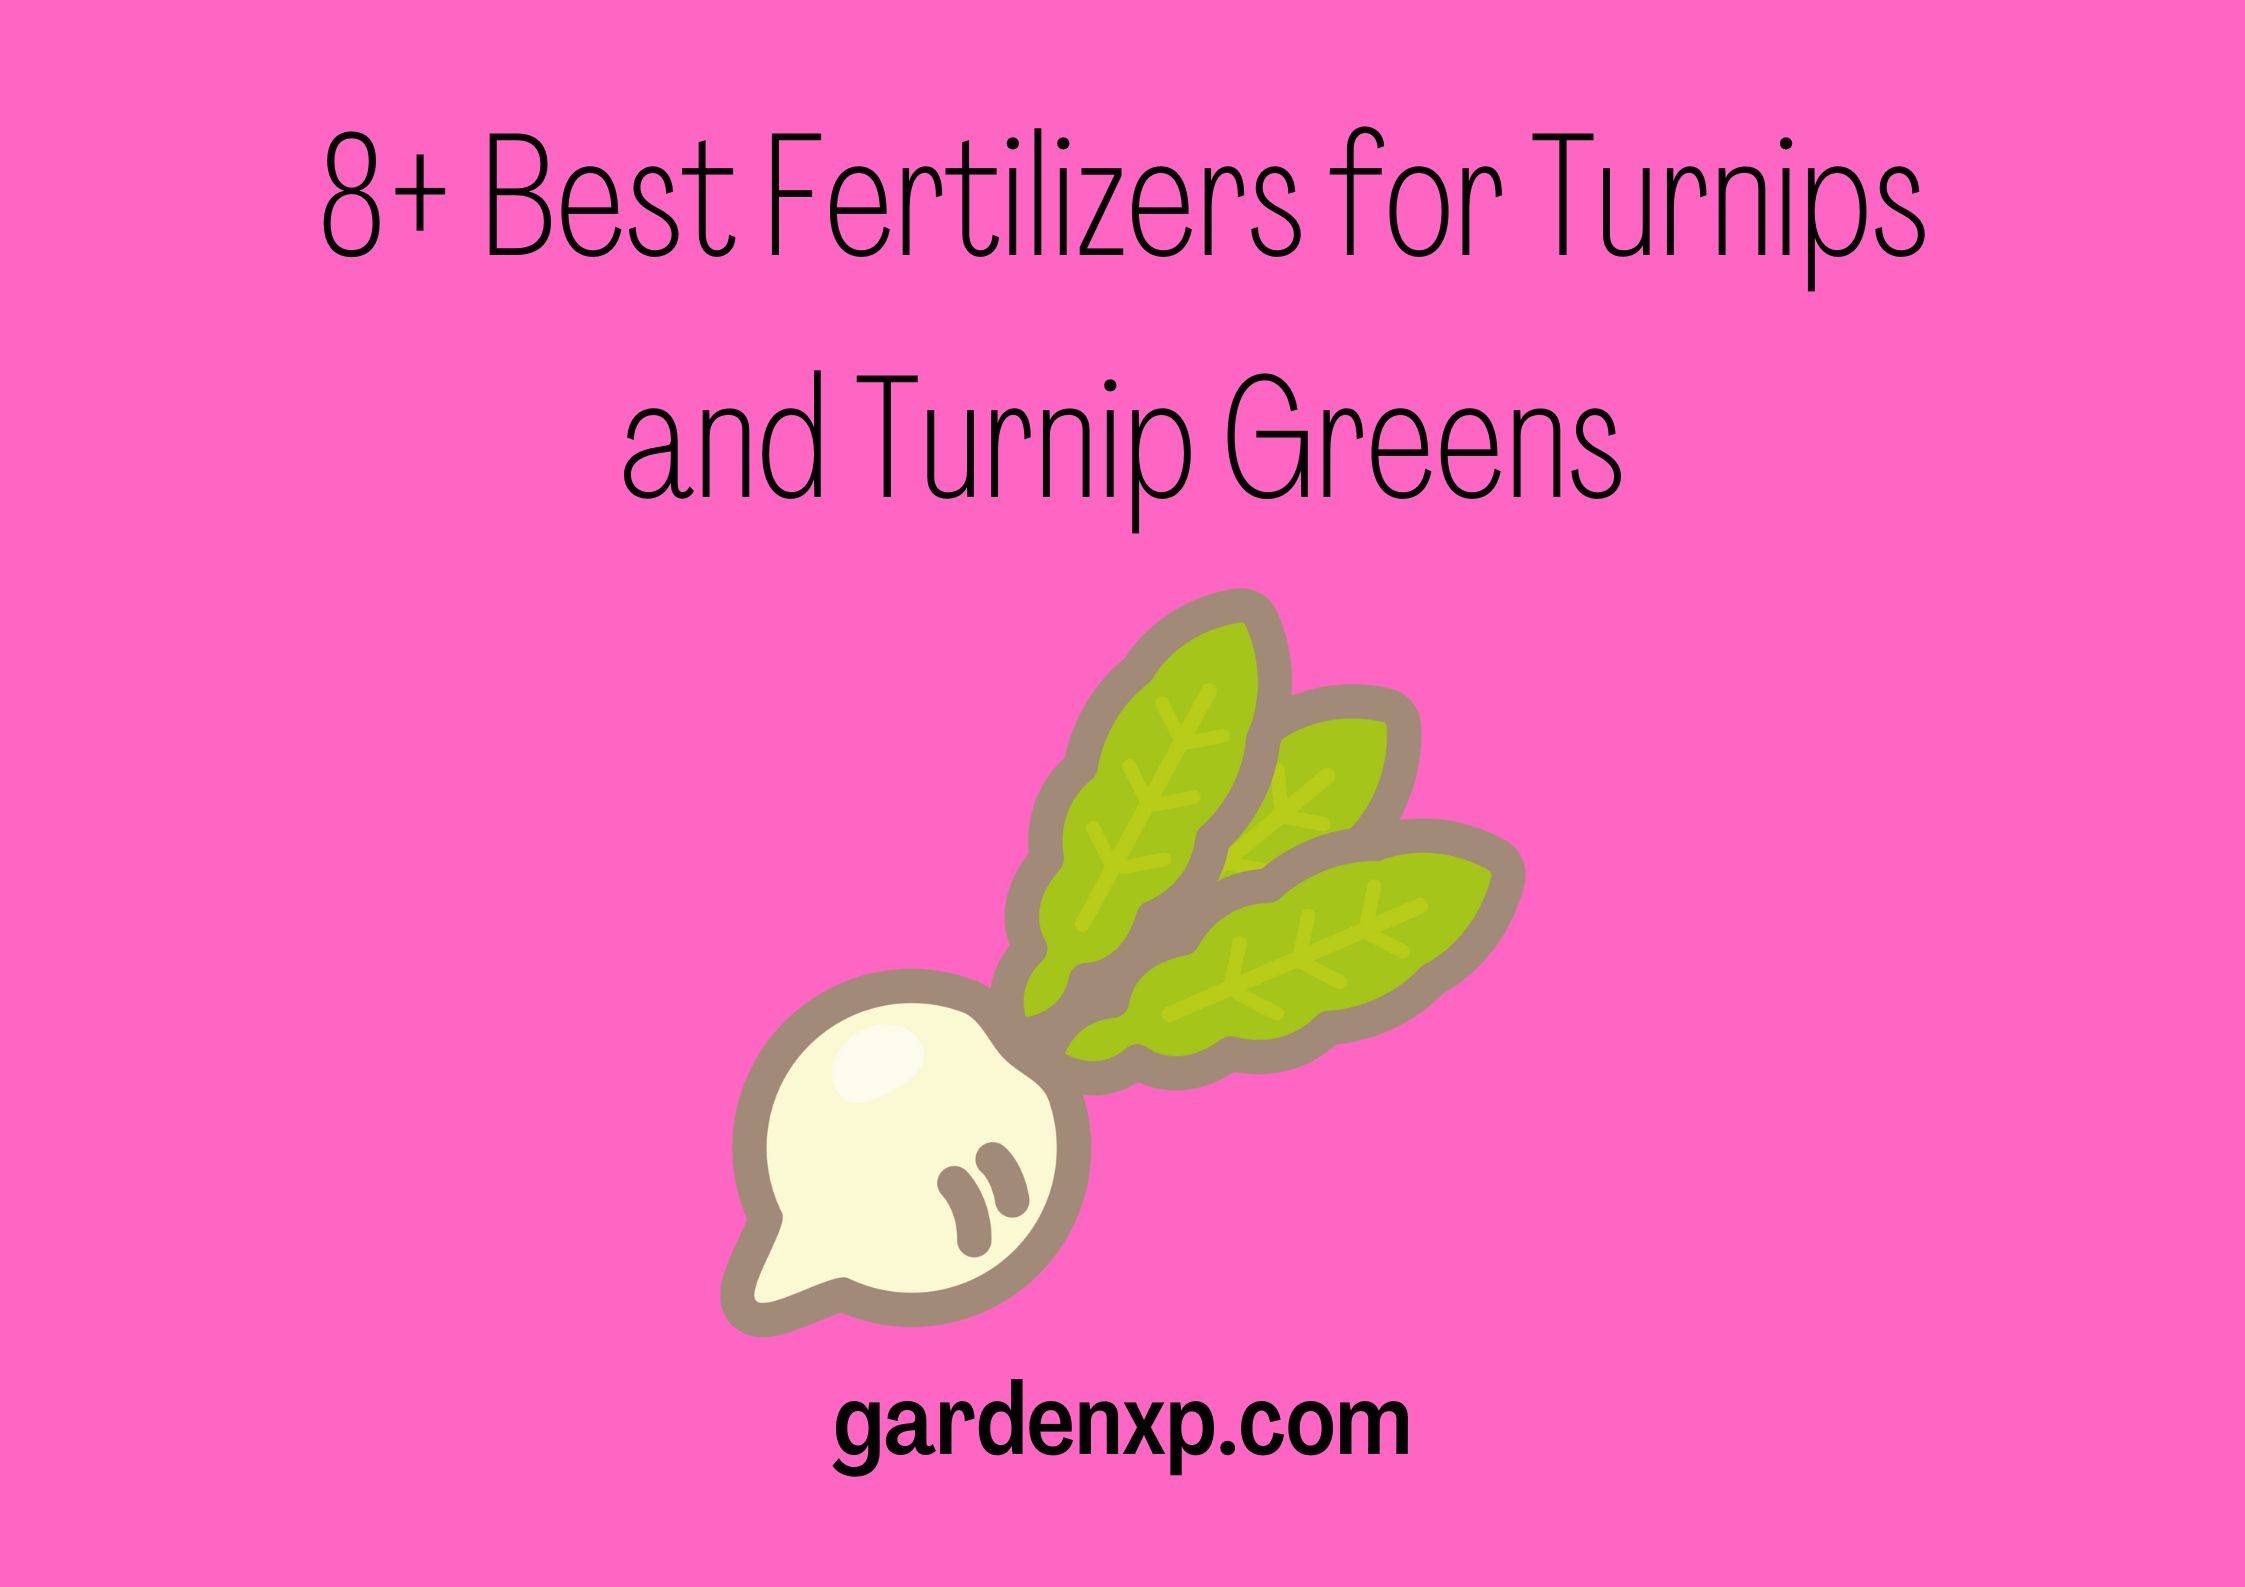 8+ Best Fertilizers for Turnips and Turnip Greens